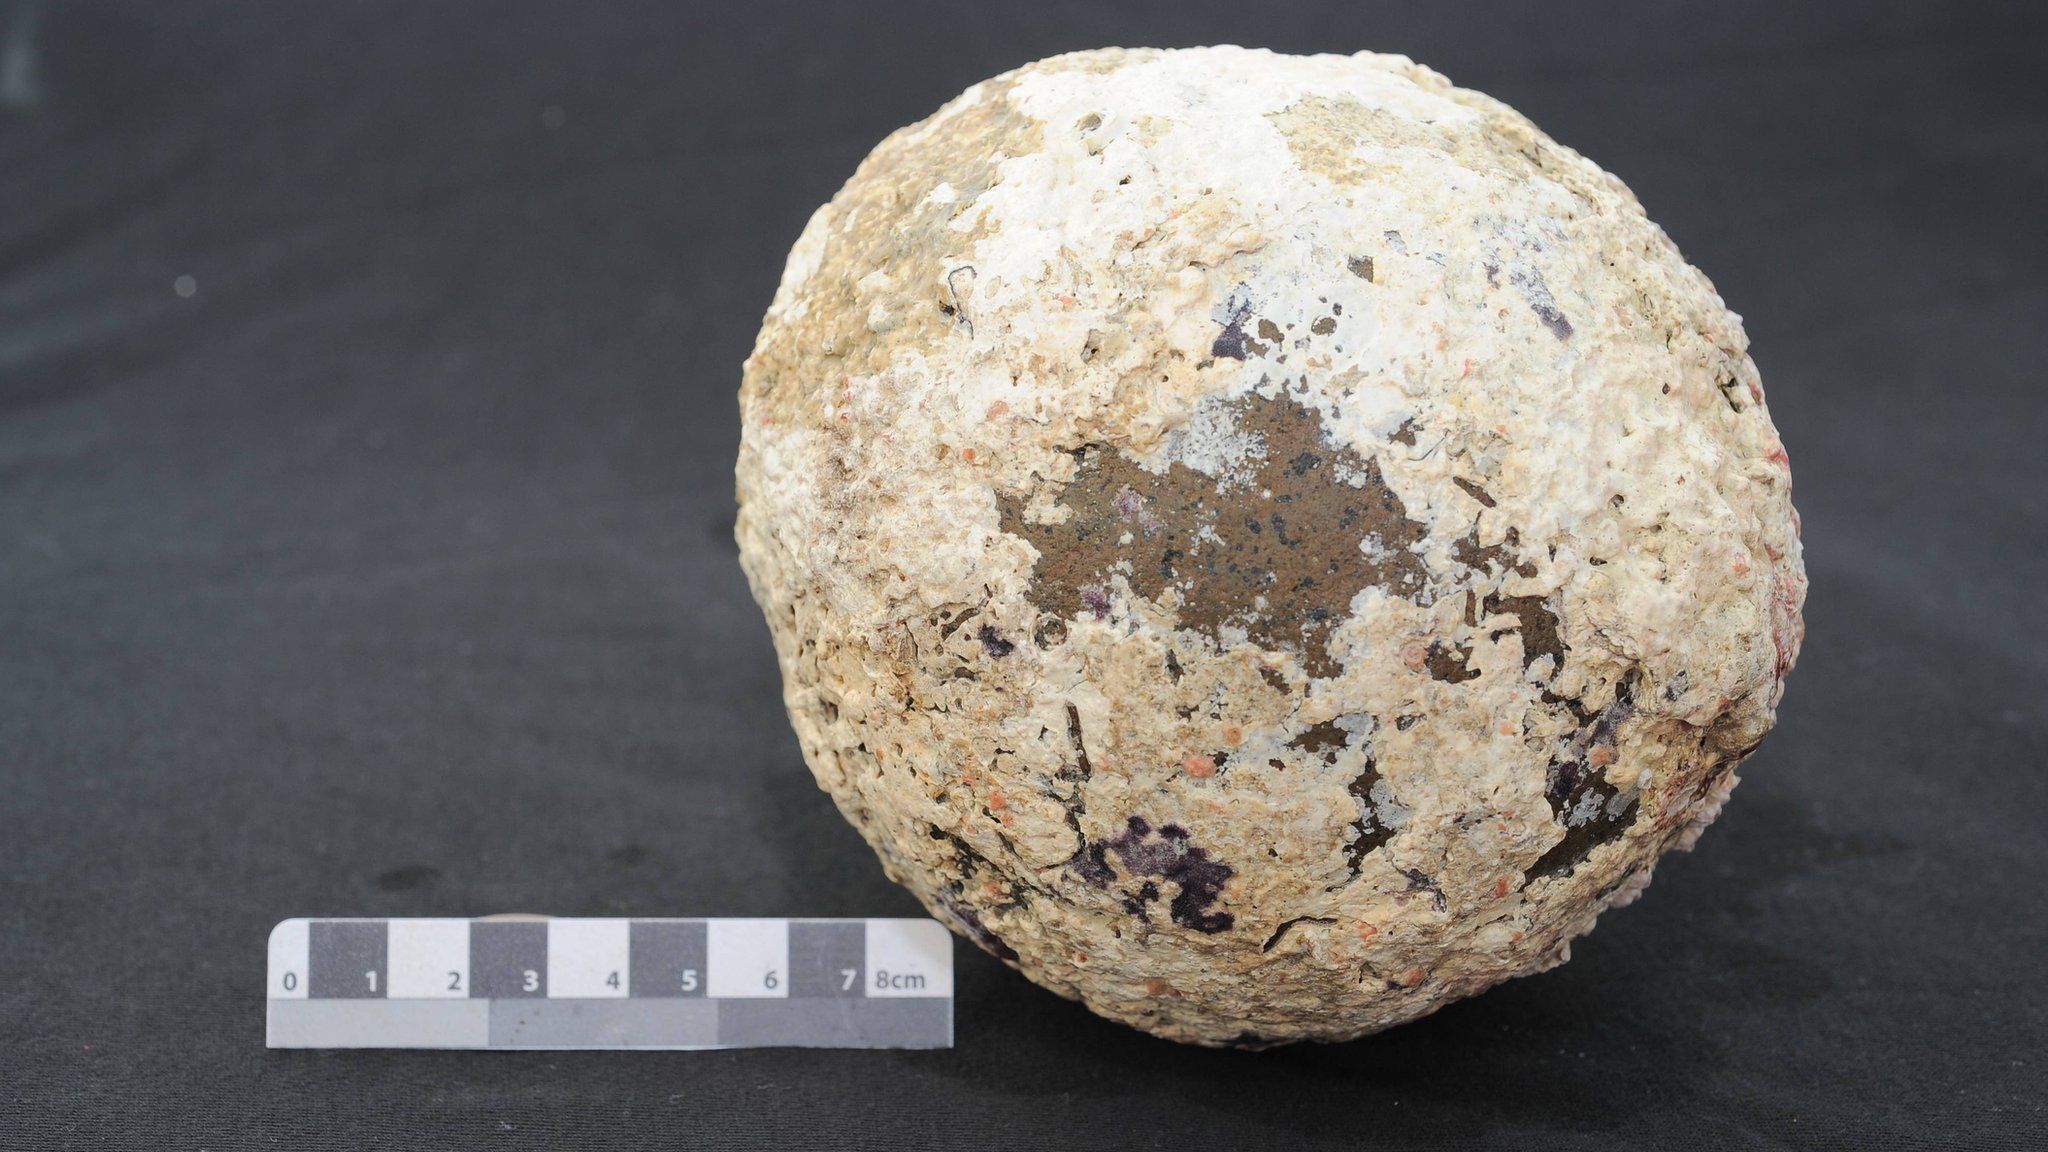 Photo of the cannonball beside a ruler